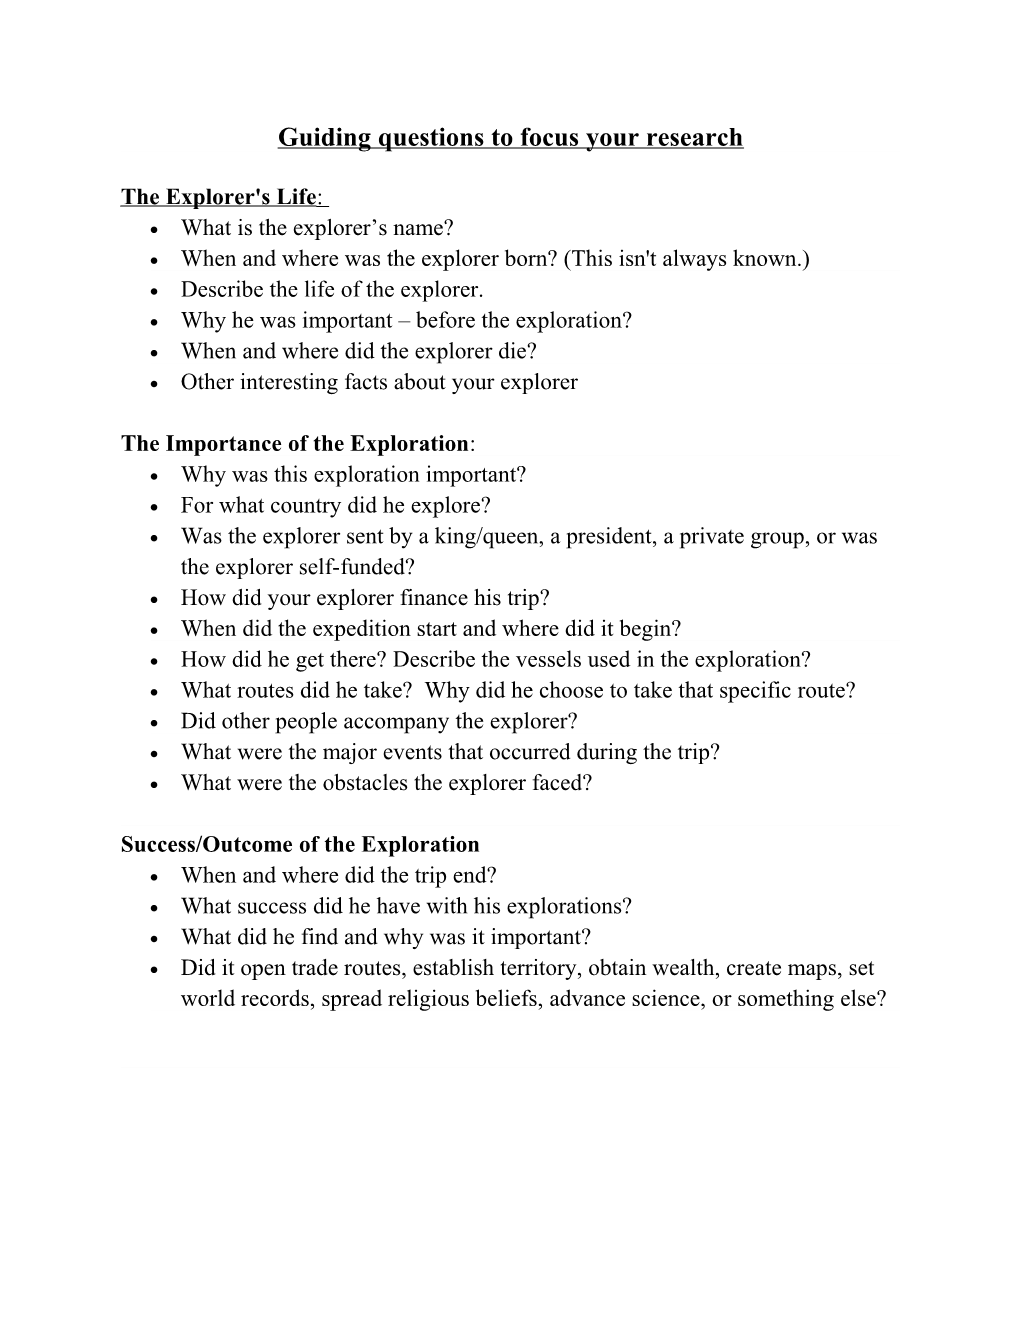 Guiding Questions to Focus Your Research